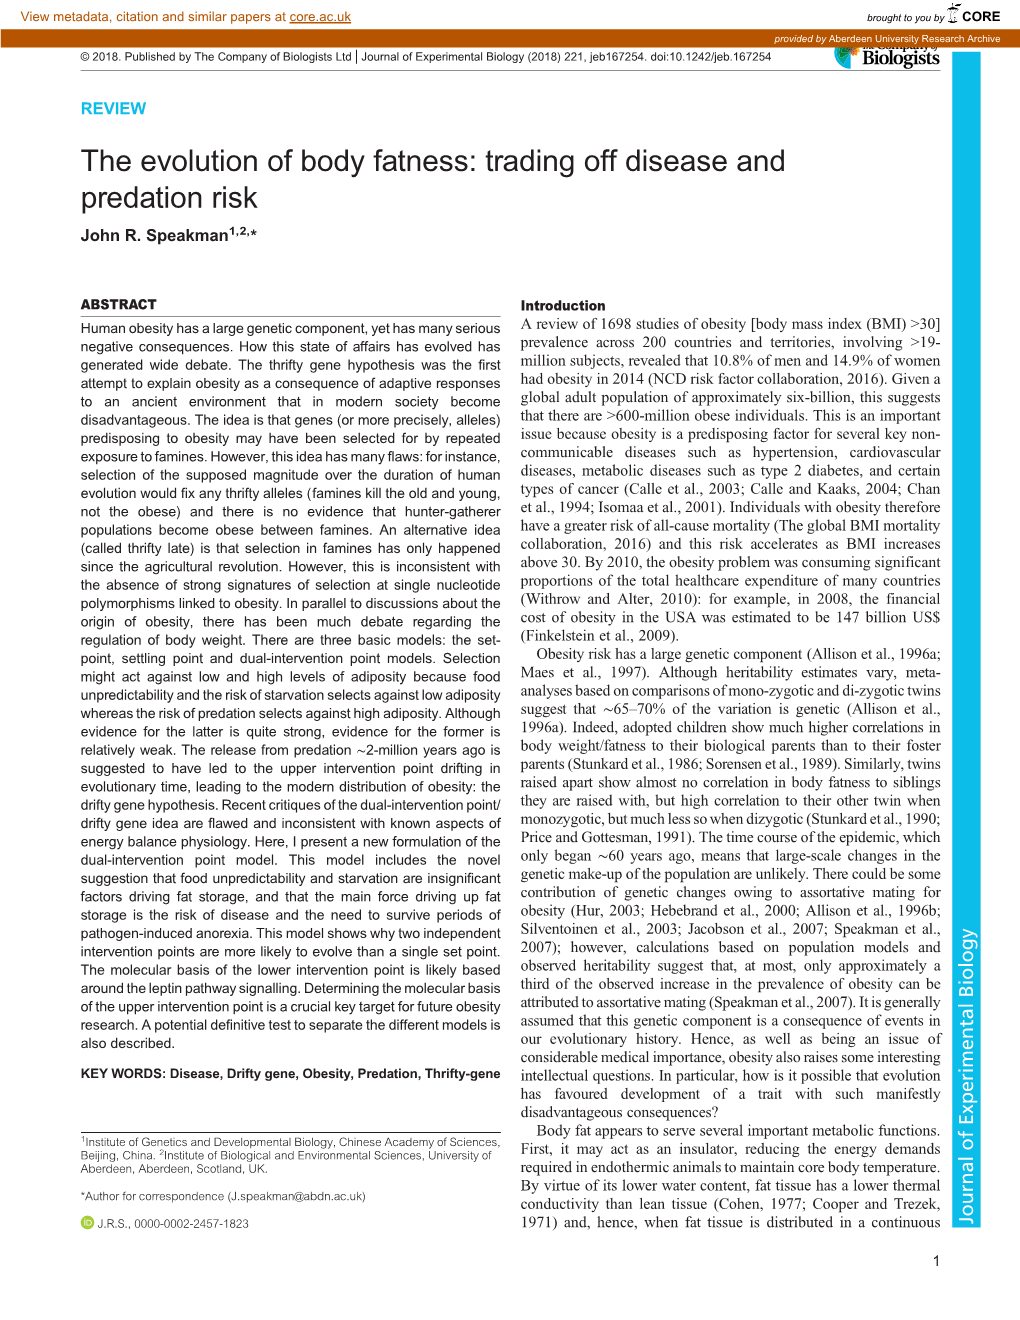 The Evolution of Body Fatness: Trading Off Disease and Predation Risk John R